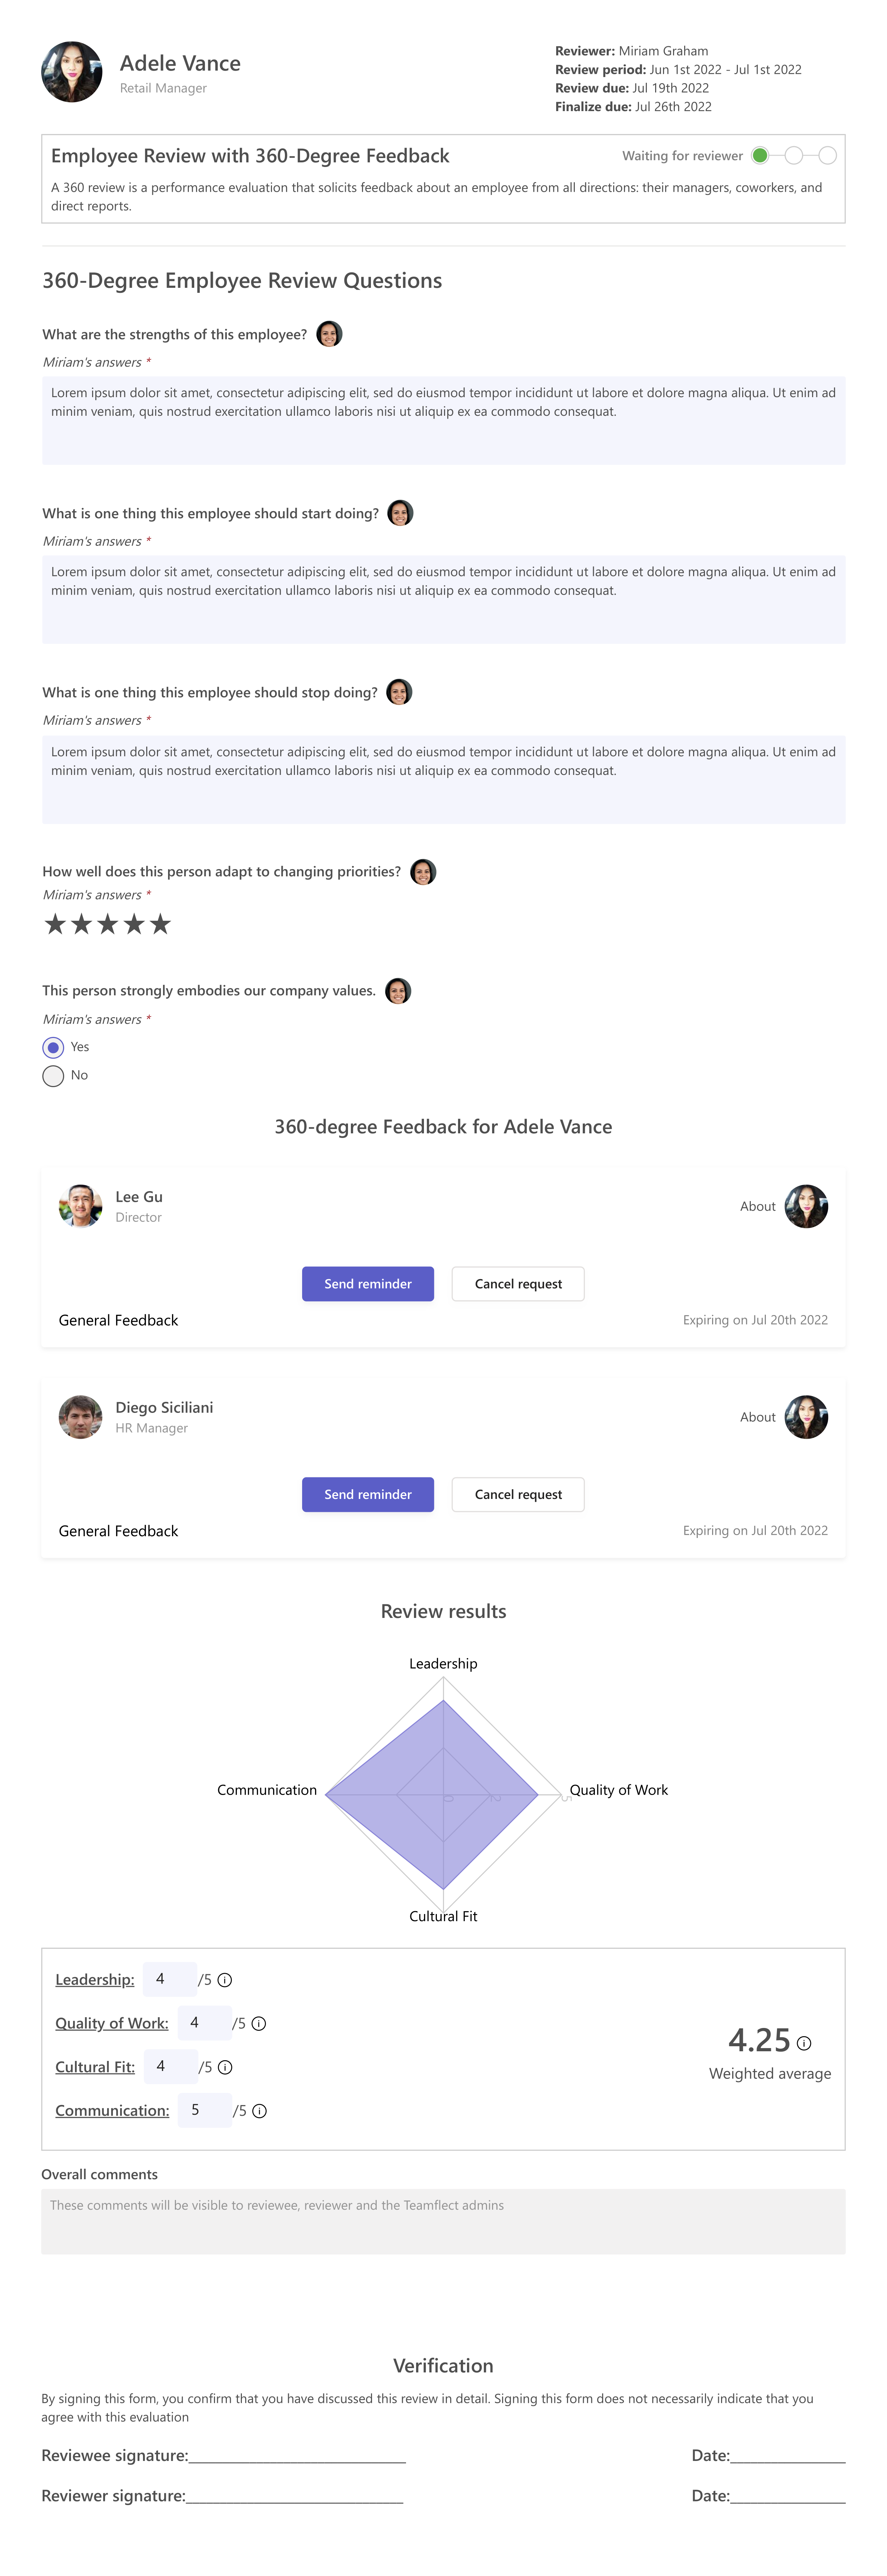 Teamflect employee review with 360-degree feedback template in Microsoft Teams